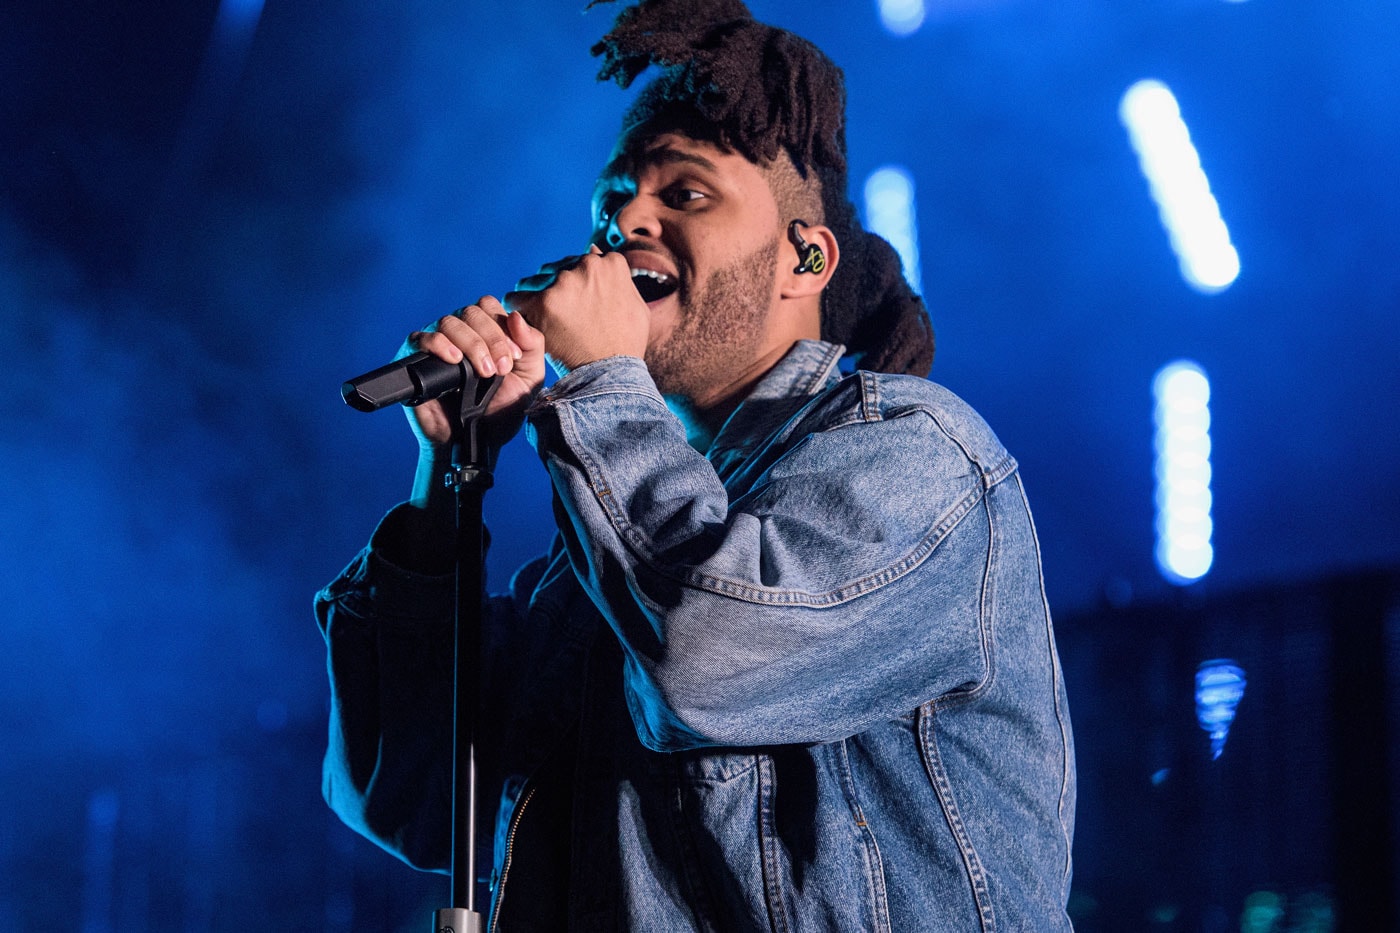 Stream The Weeknd's Sophomore Album 'Beauty Behind the Madness'